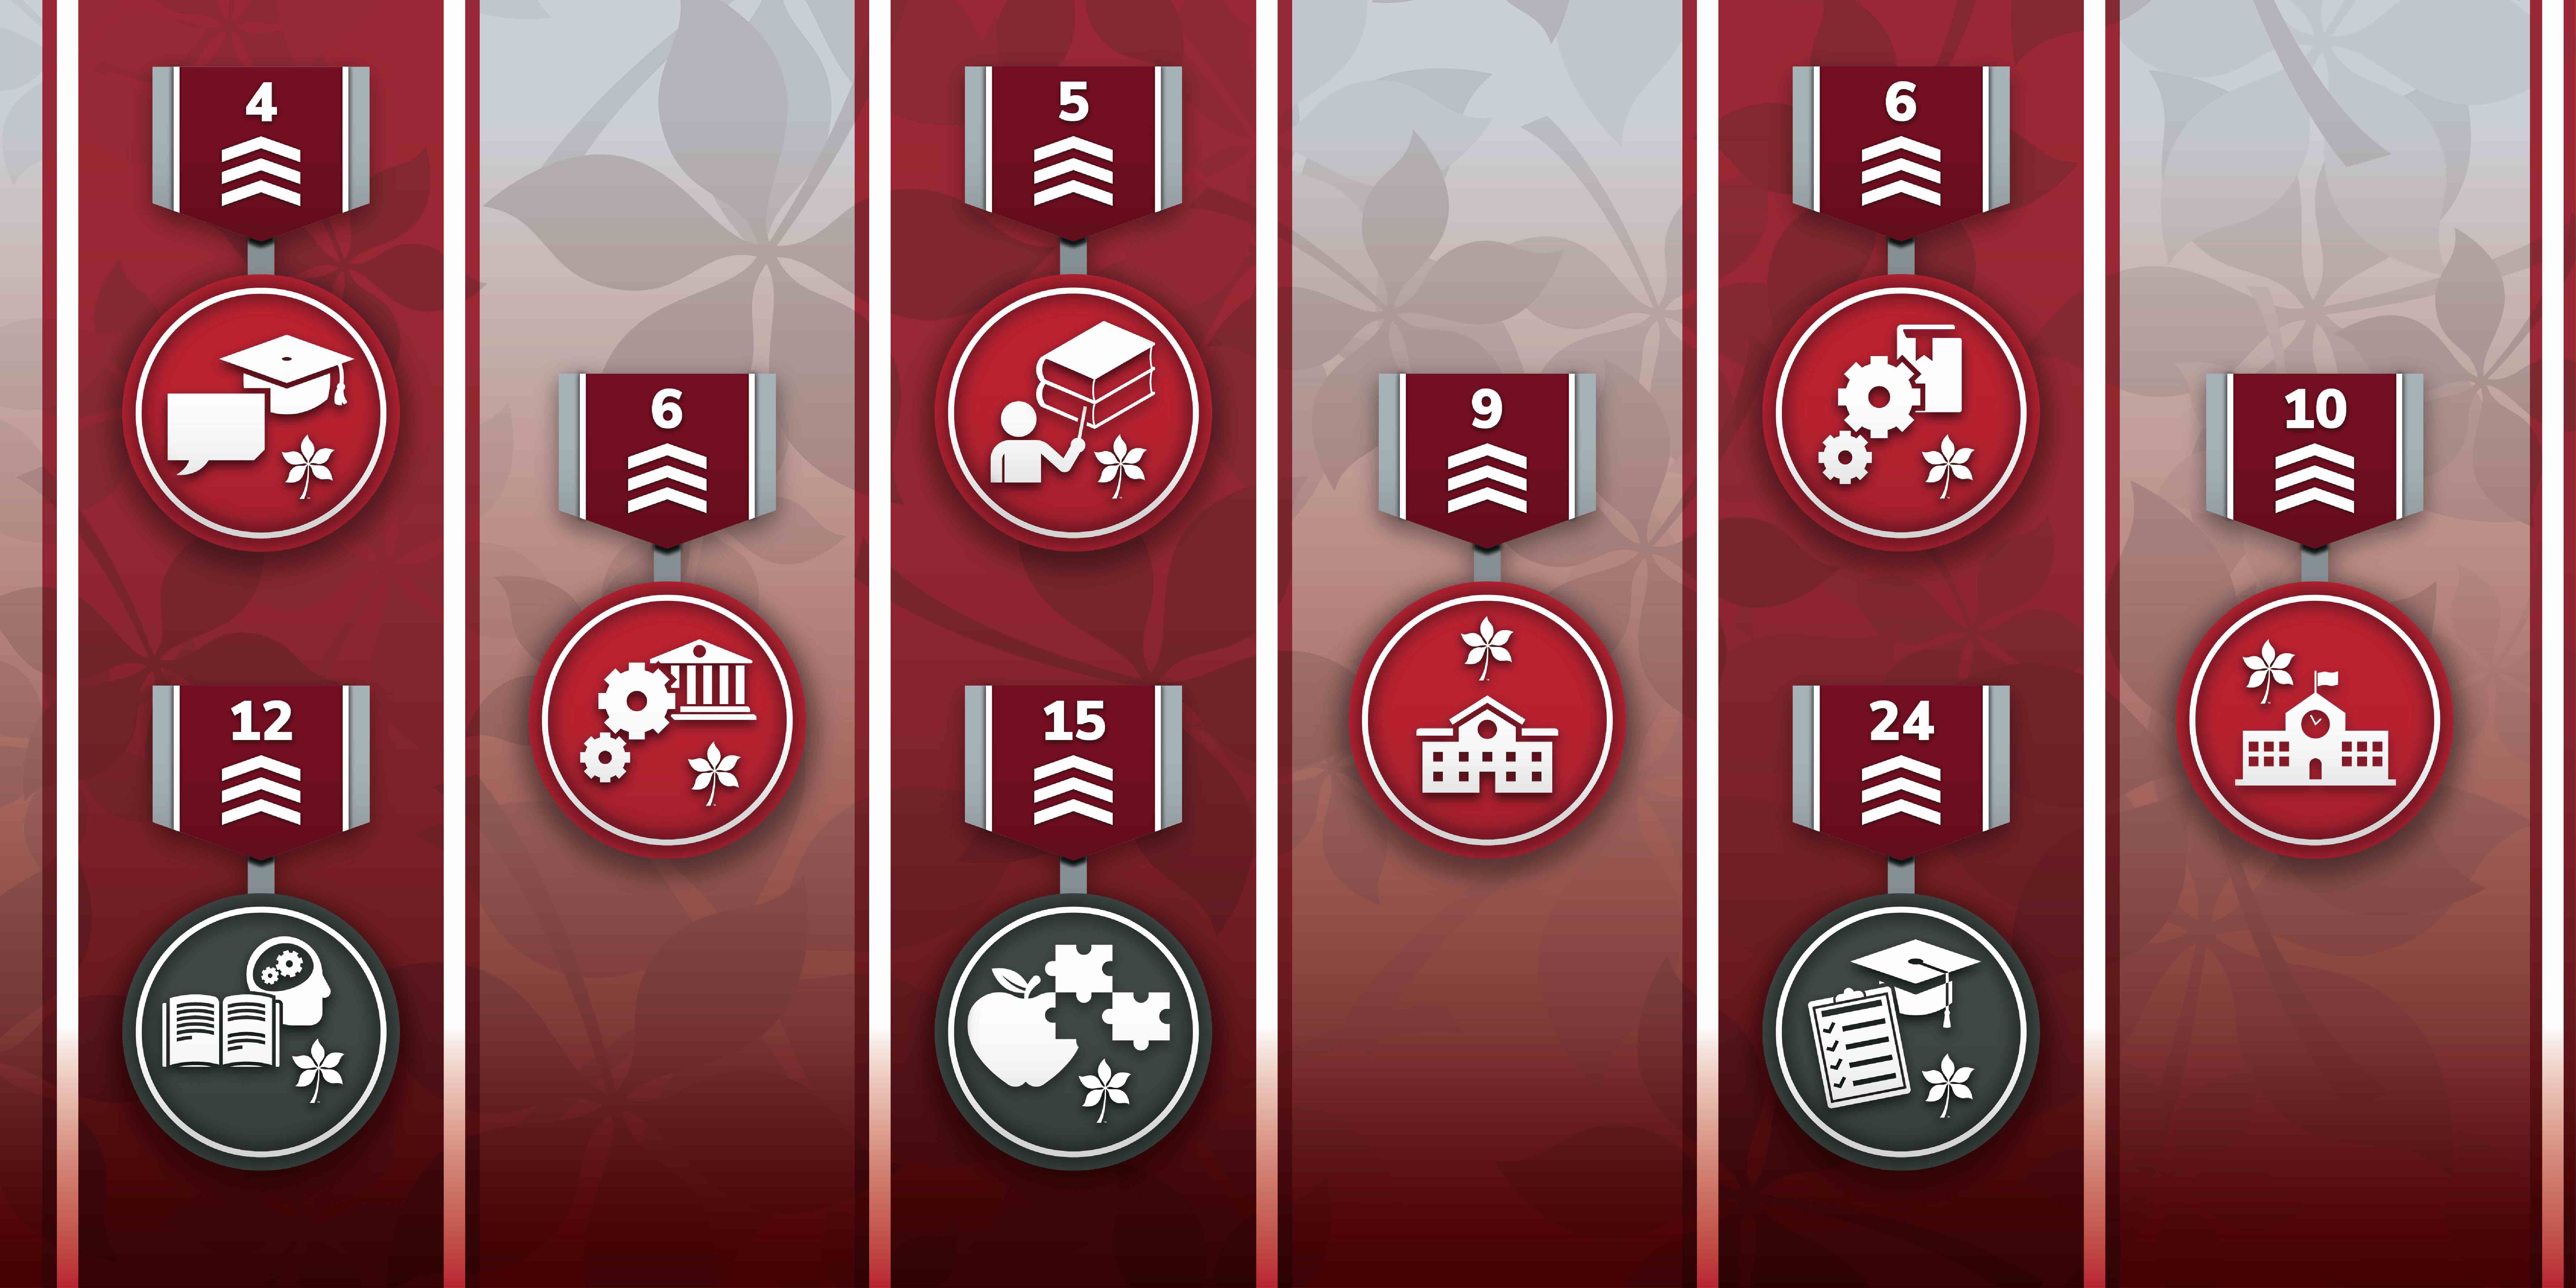 Collage of Ohio State ranking badges